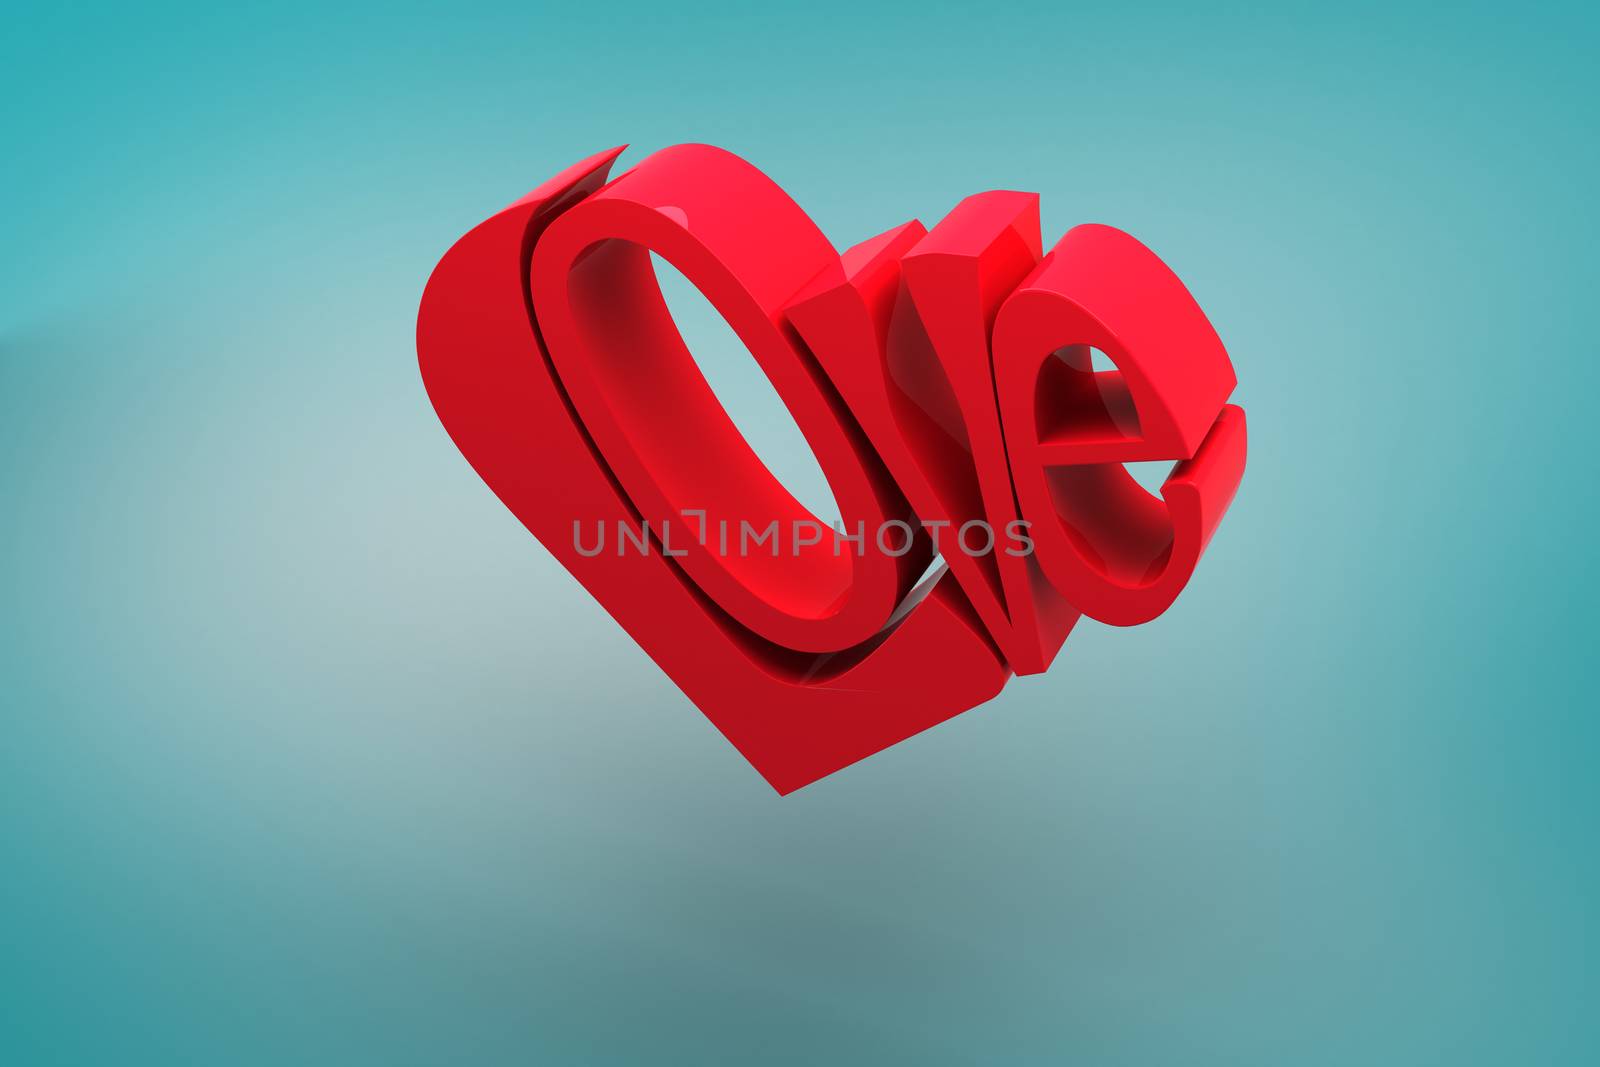 Composite image of love heart by Wavebreakmedia